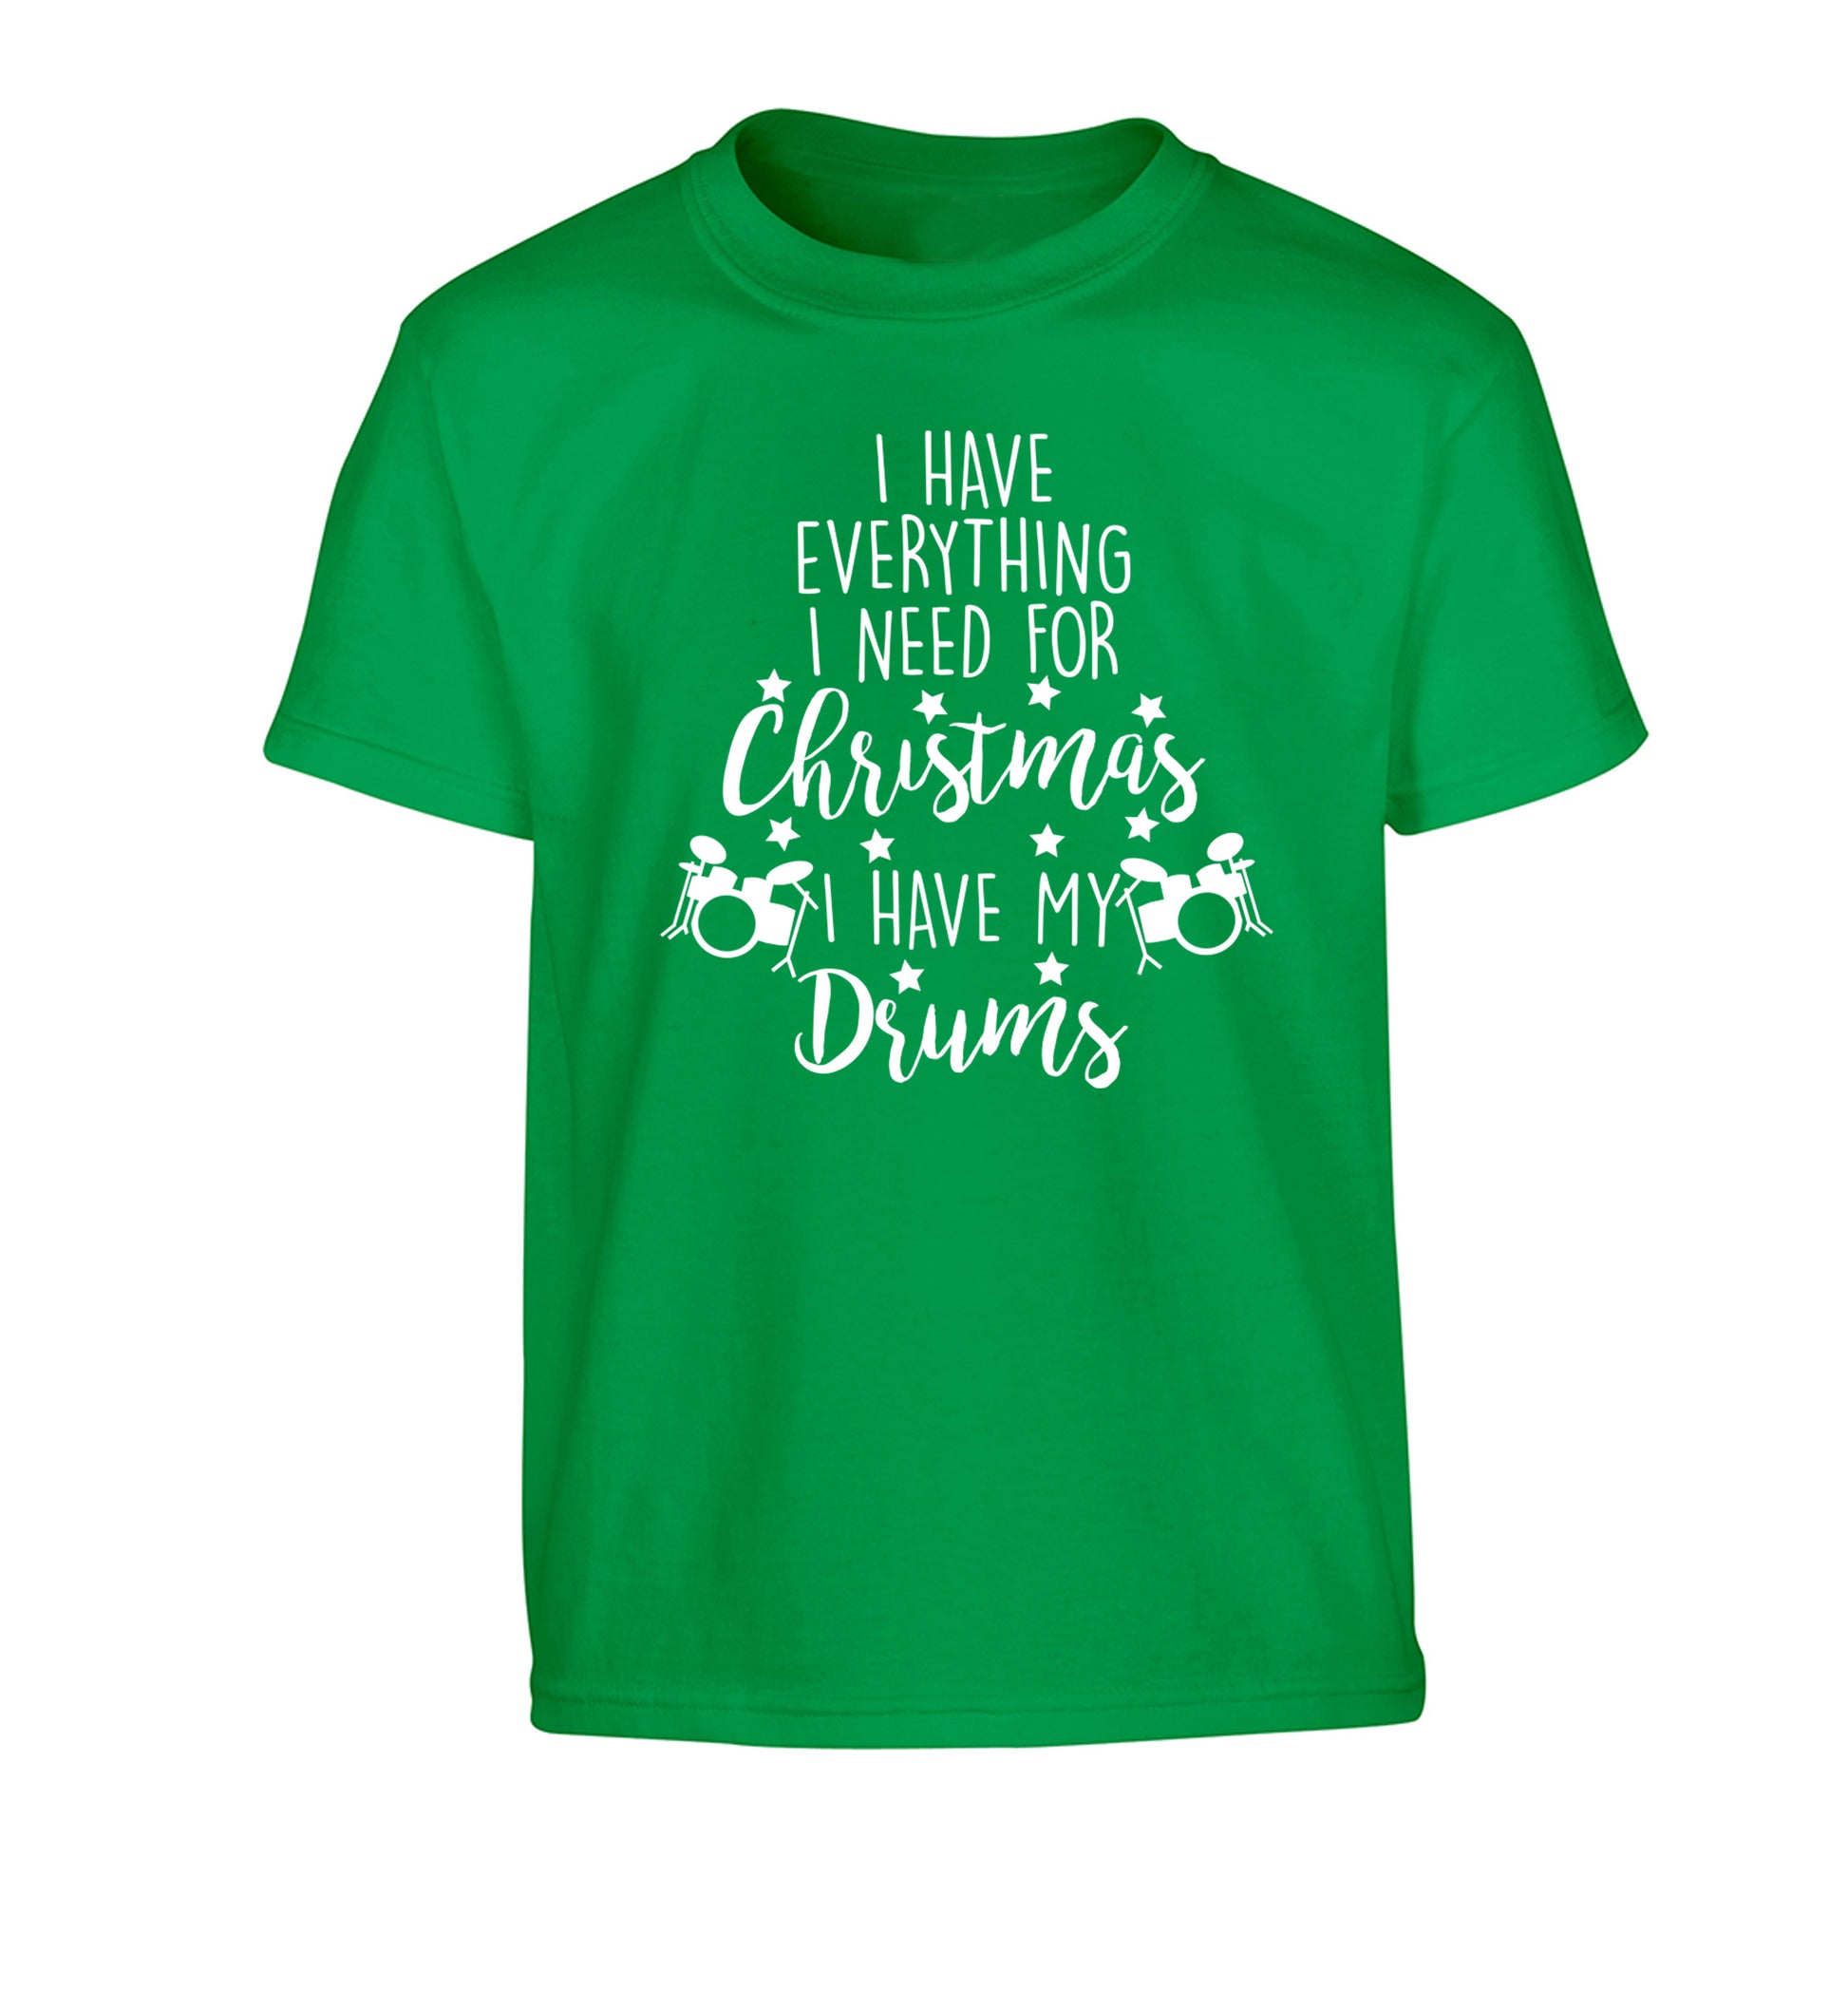 I have everything I need for Christmas I have my drums! Children's green Tshirt 12-14 Years